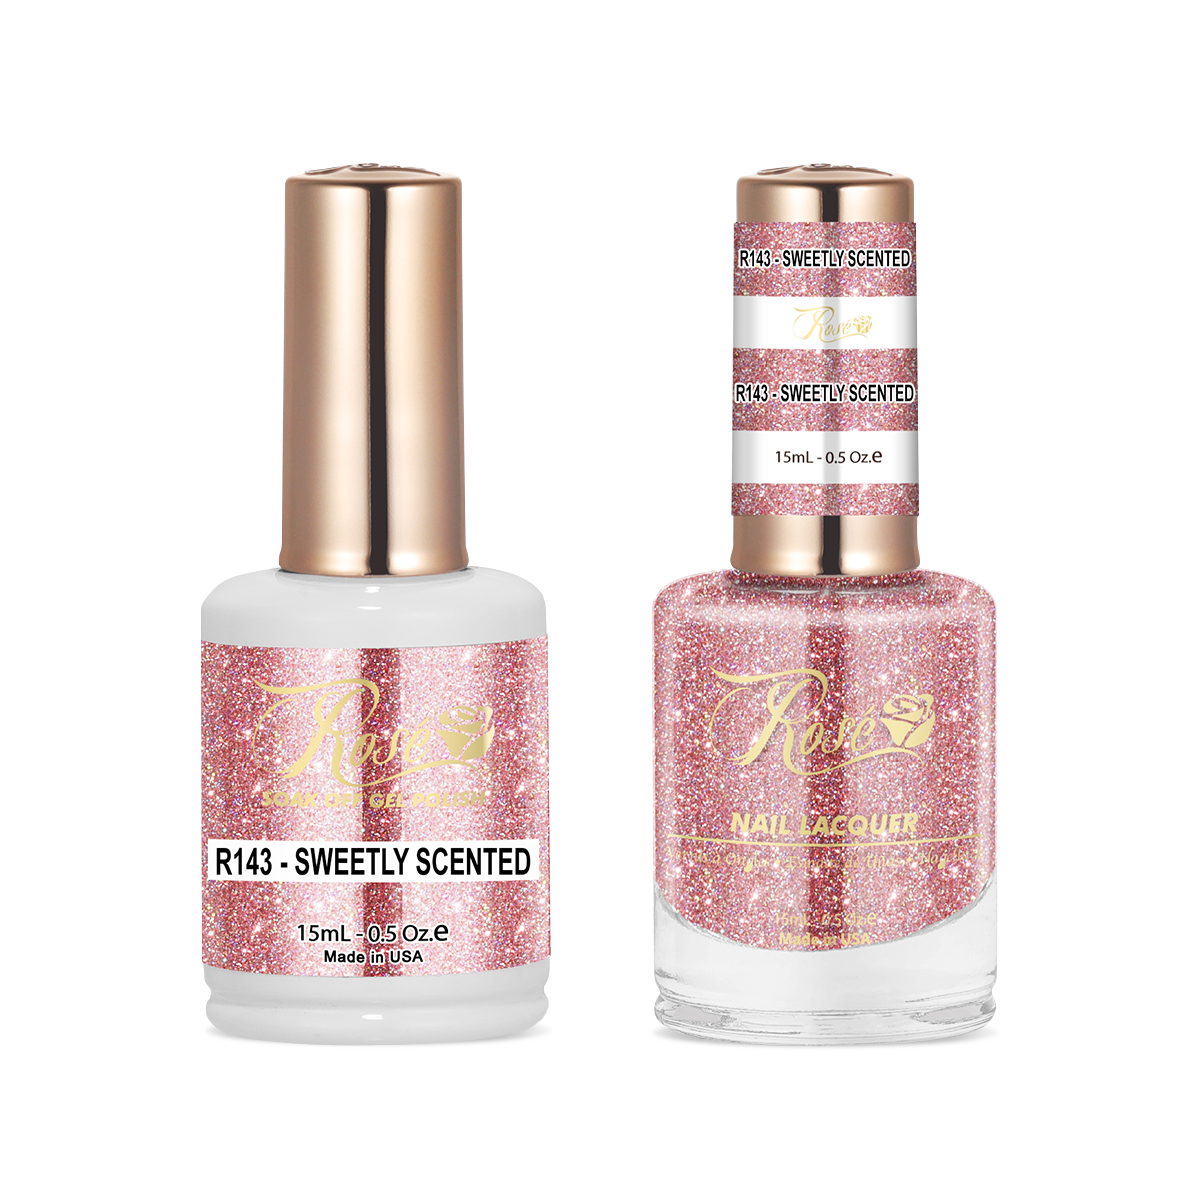 Rosé Duo - R143 Sweetly Scented